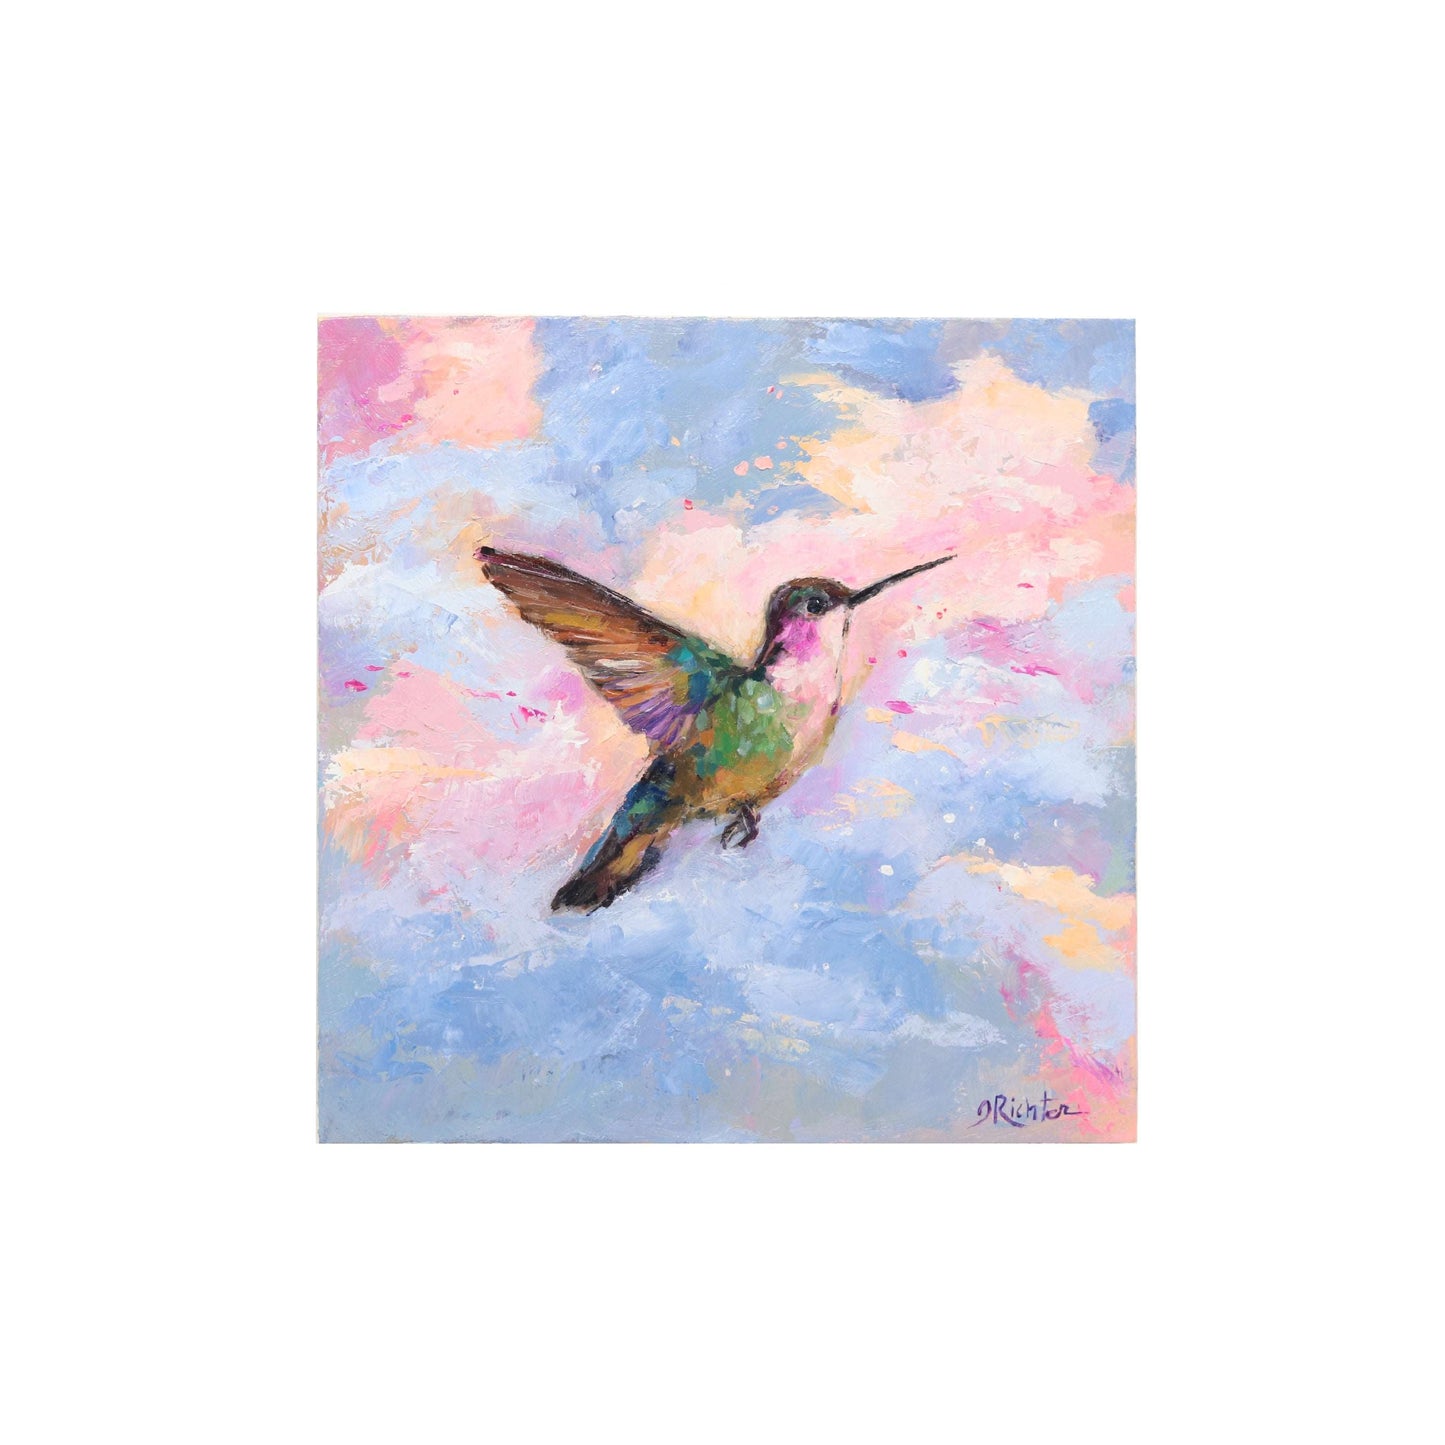 Oil painting with hummingbird and pastel pink clouds in blue sky background